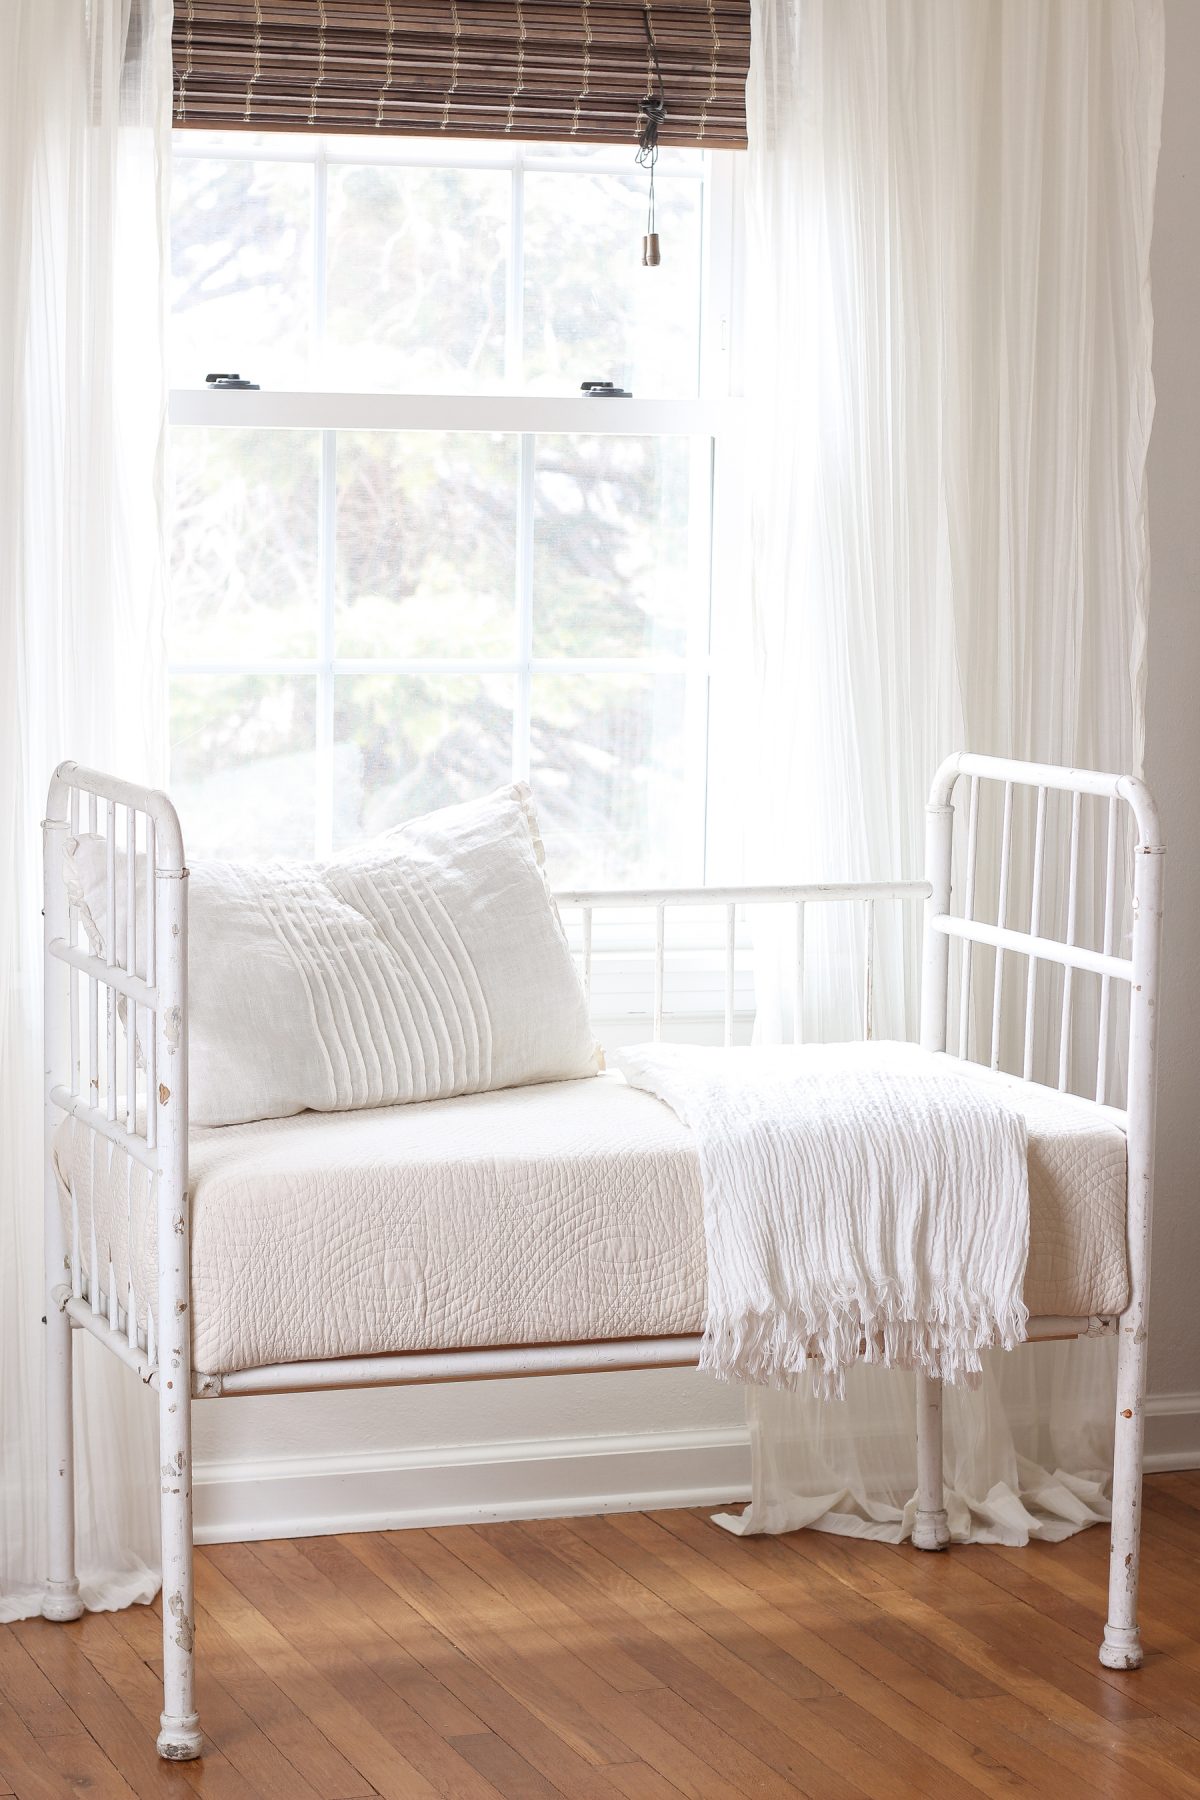 Home and lifestyle blogger Liz Fourez turns a wooden antique crib into an adorable bench with a quilted cushion.